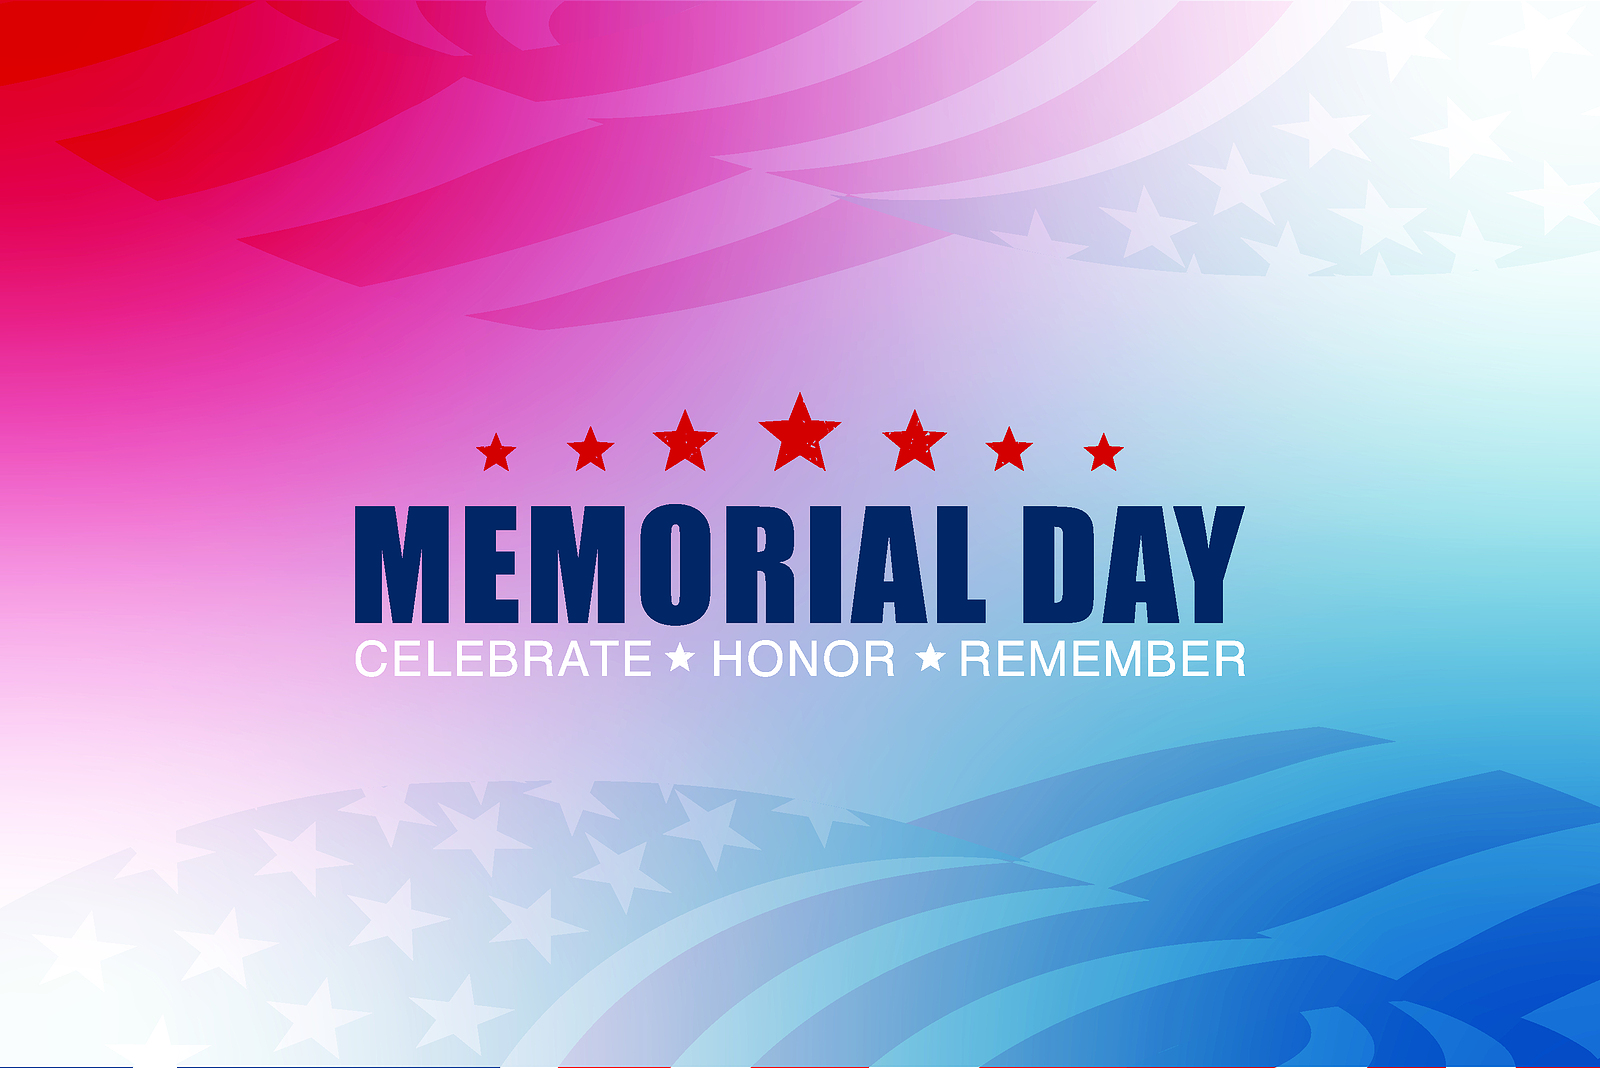 Memorial Day A Time for Reflection and Senior Home Care Collier Home